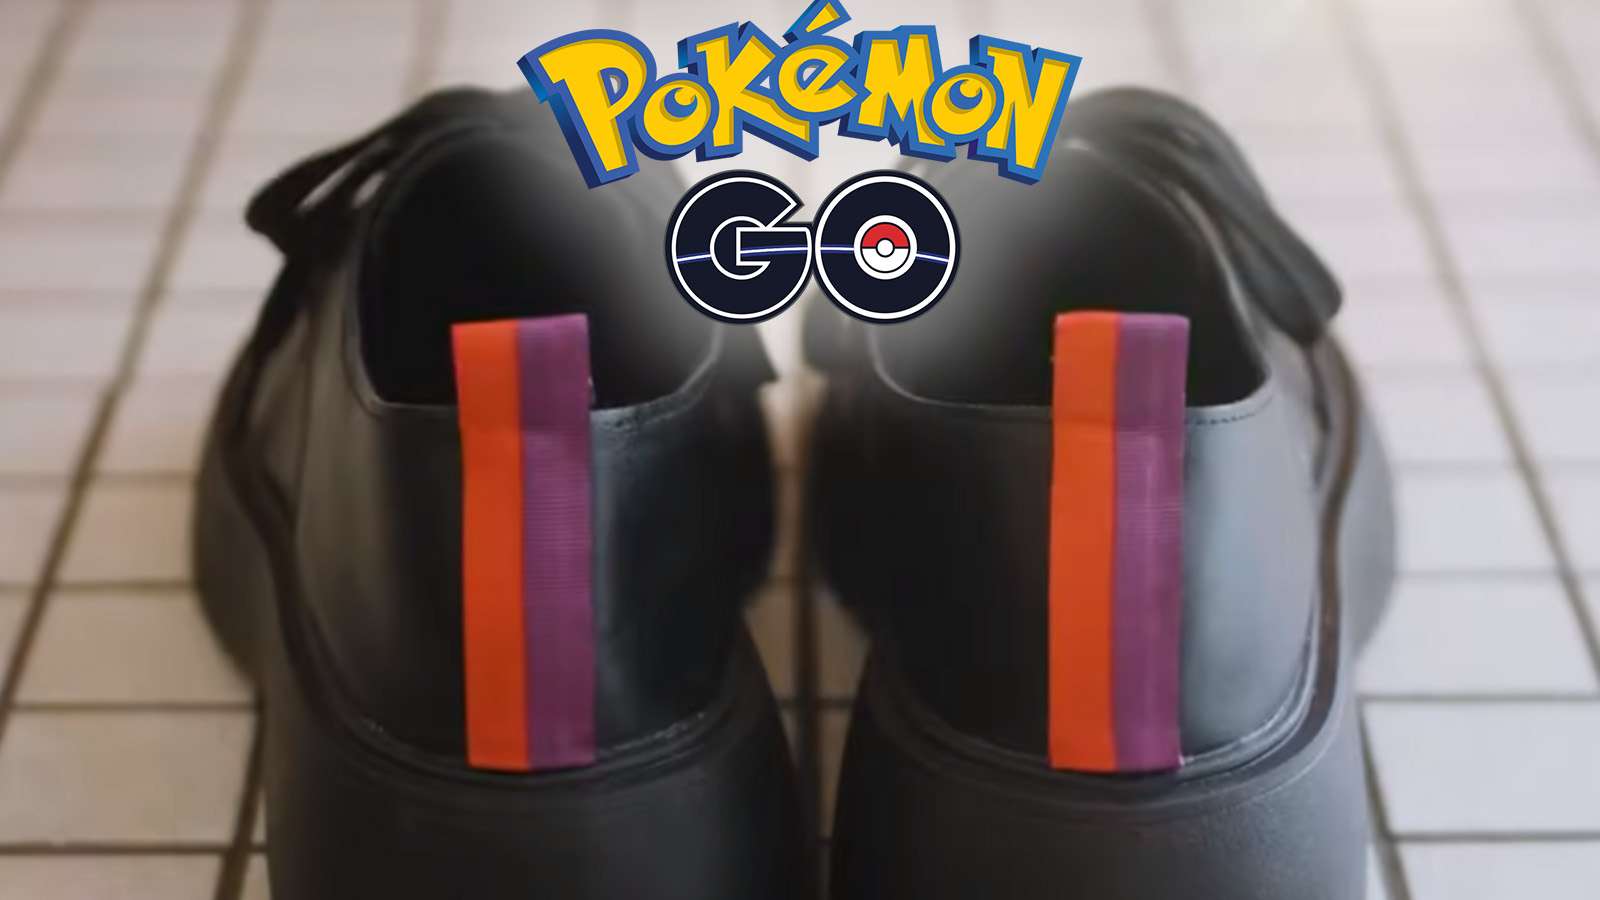 Pokemon Go logo on top of shoes with the scarlet and violet colors